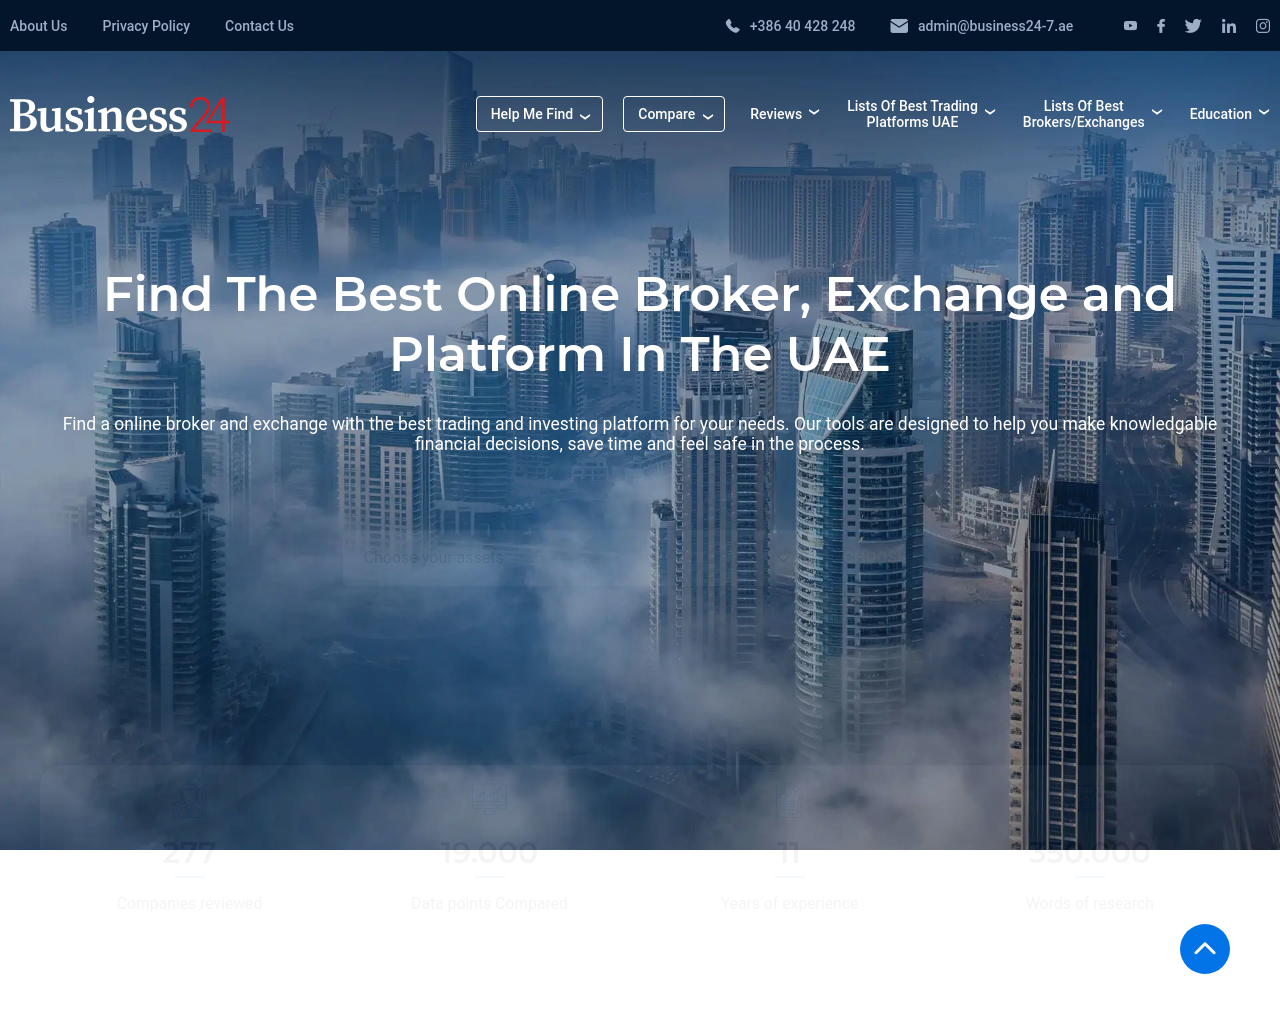 business24-7.ae